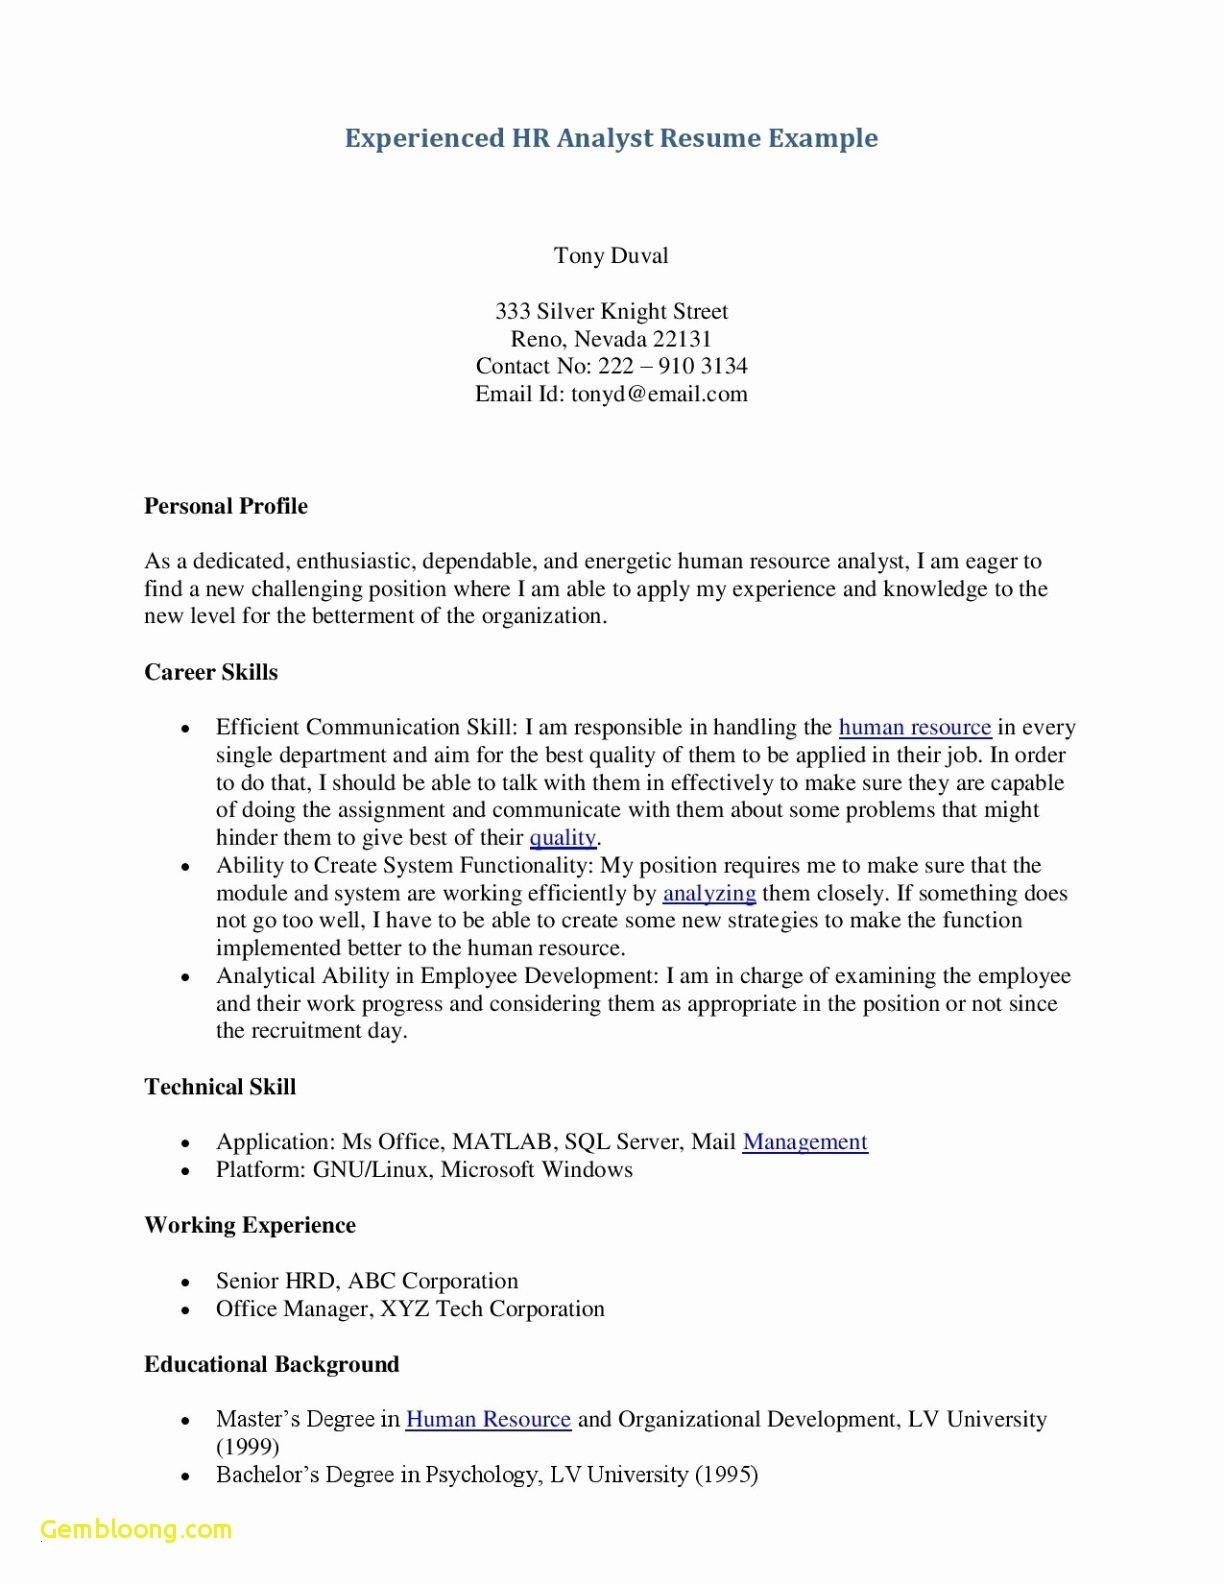 Email Letter Of Recommendation Template - Creating A Resume Template Legalsocialmobilitypartnership